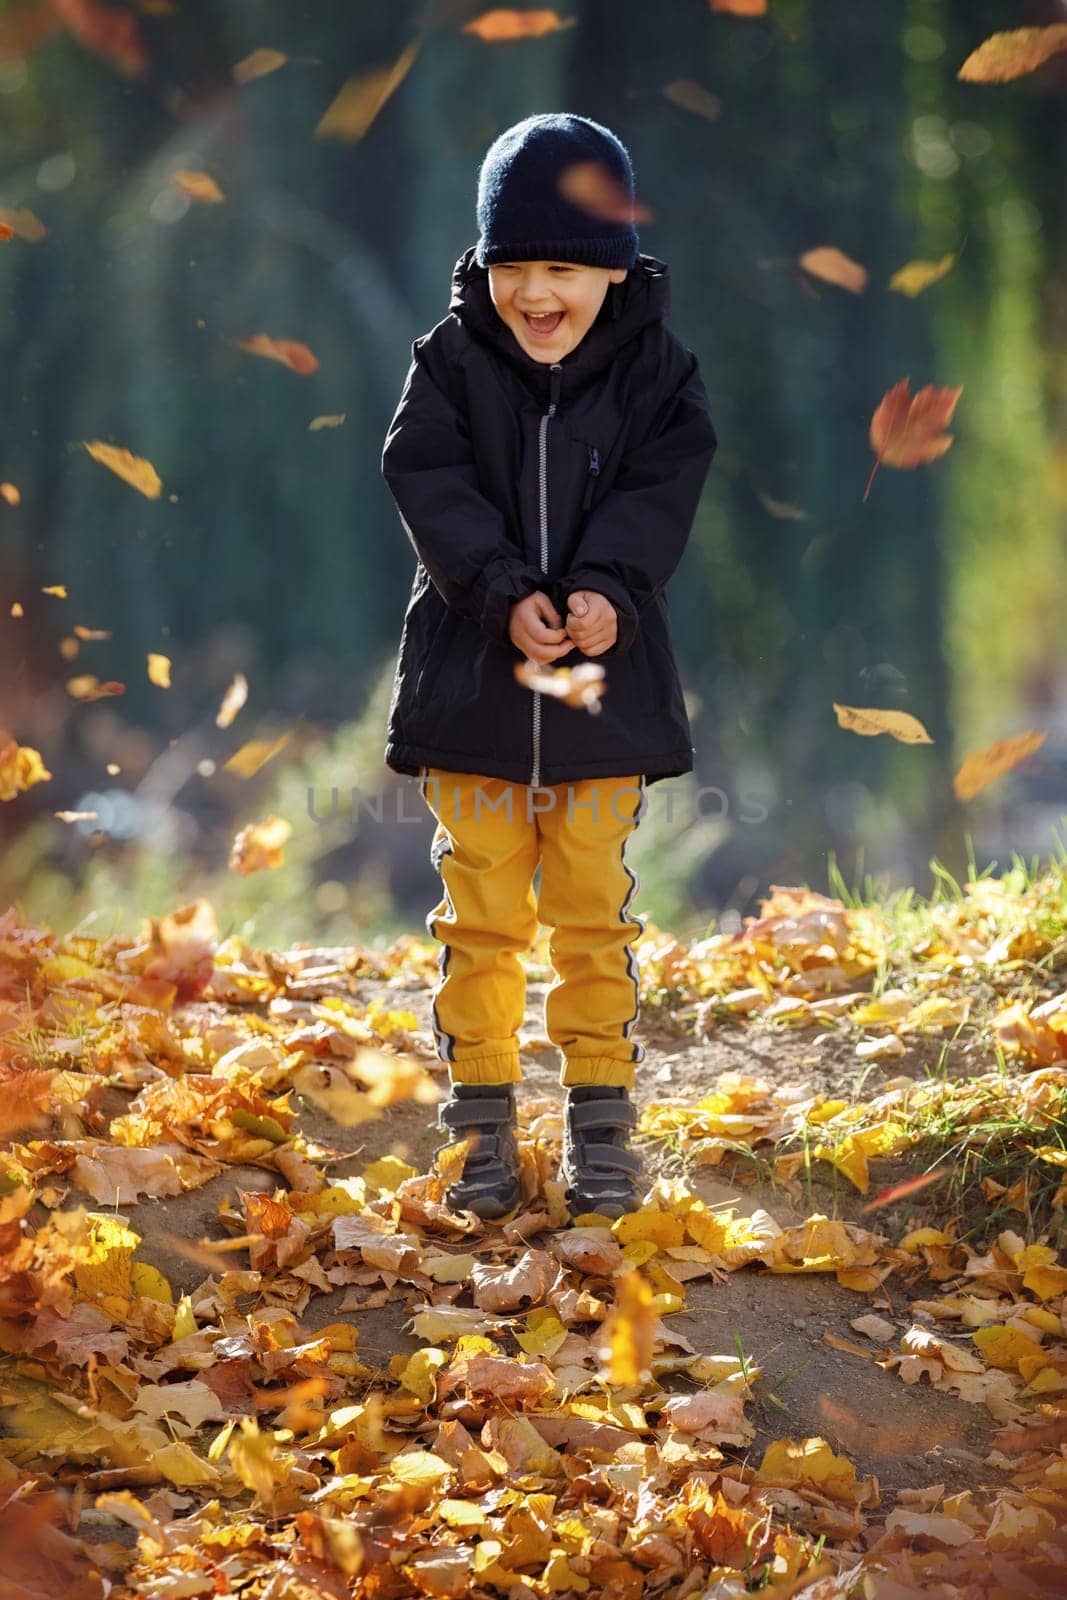 Kid play in autumn park. Child throwing yellow leaves. Child boy with oak and maple leaf. Fall foliage. Family outdoor fun in autumn. Toddler or preschooler in fall. by Lincikas